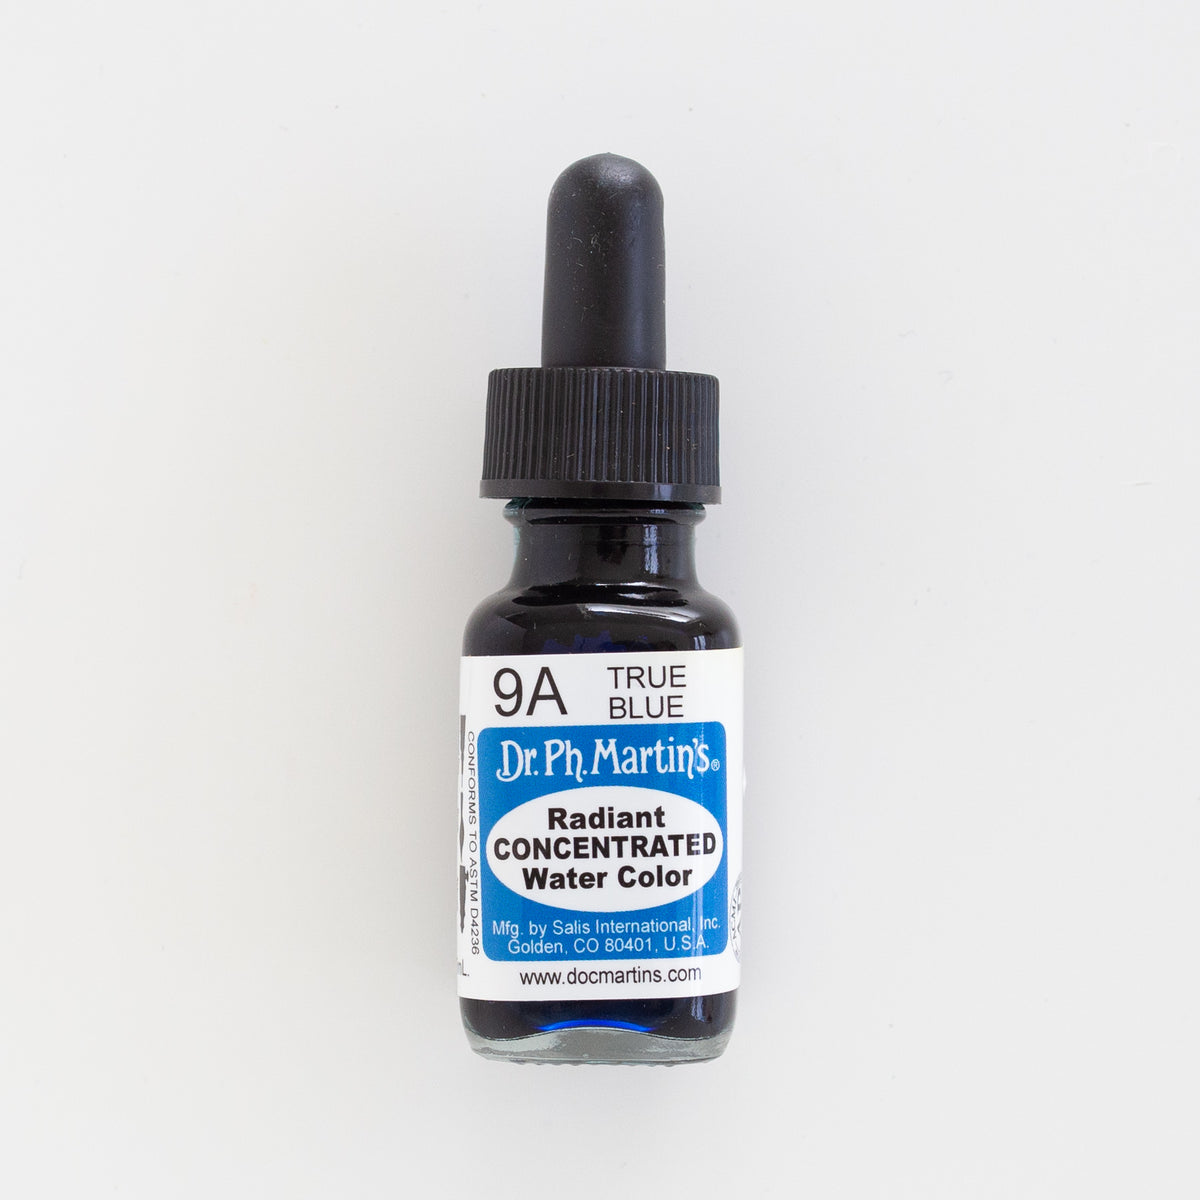 Dr. Ph. Martin’s Radiant Concentrated 9A True Blue